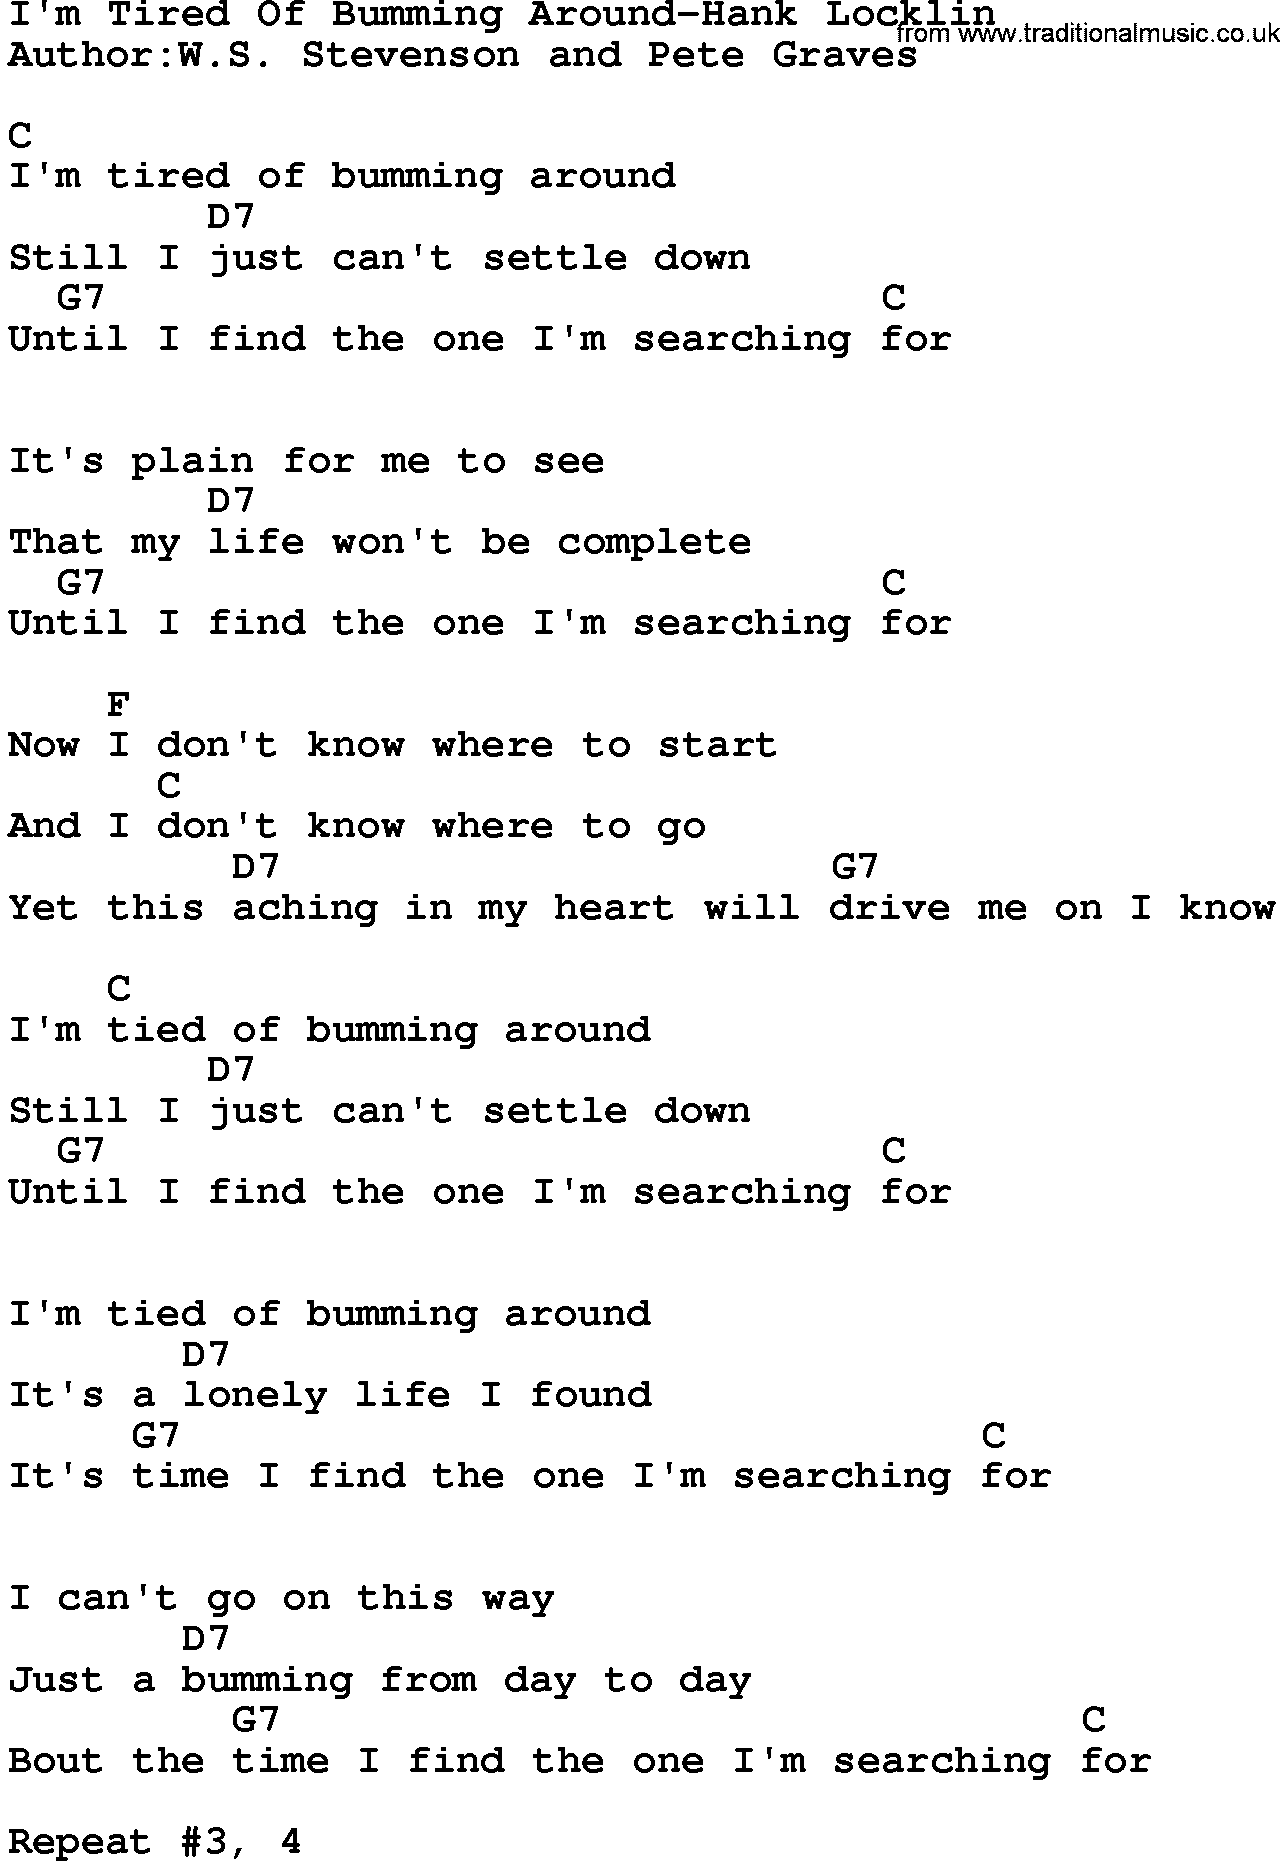 Country music song: I'm Tired Of Bumming Around-Hank Locklin lyrics and chords